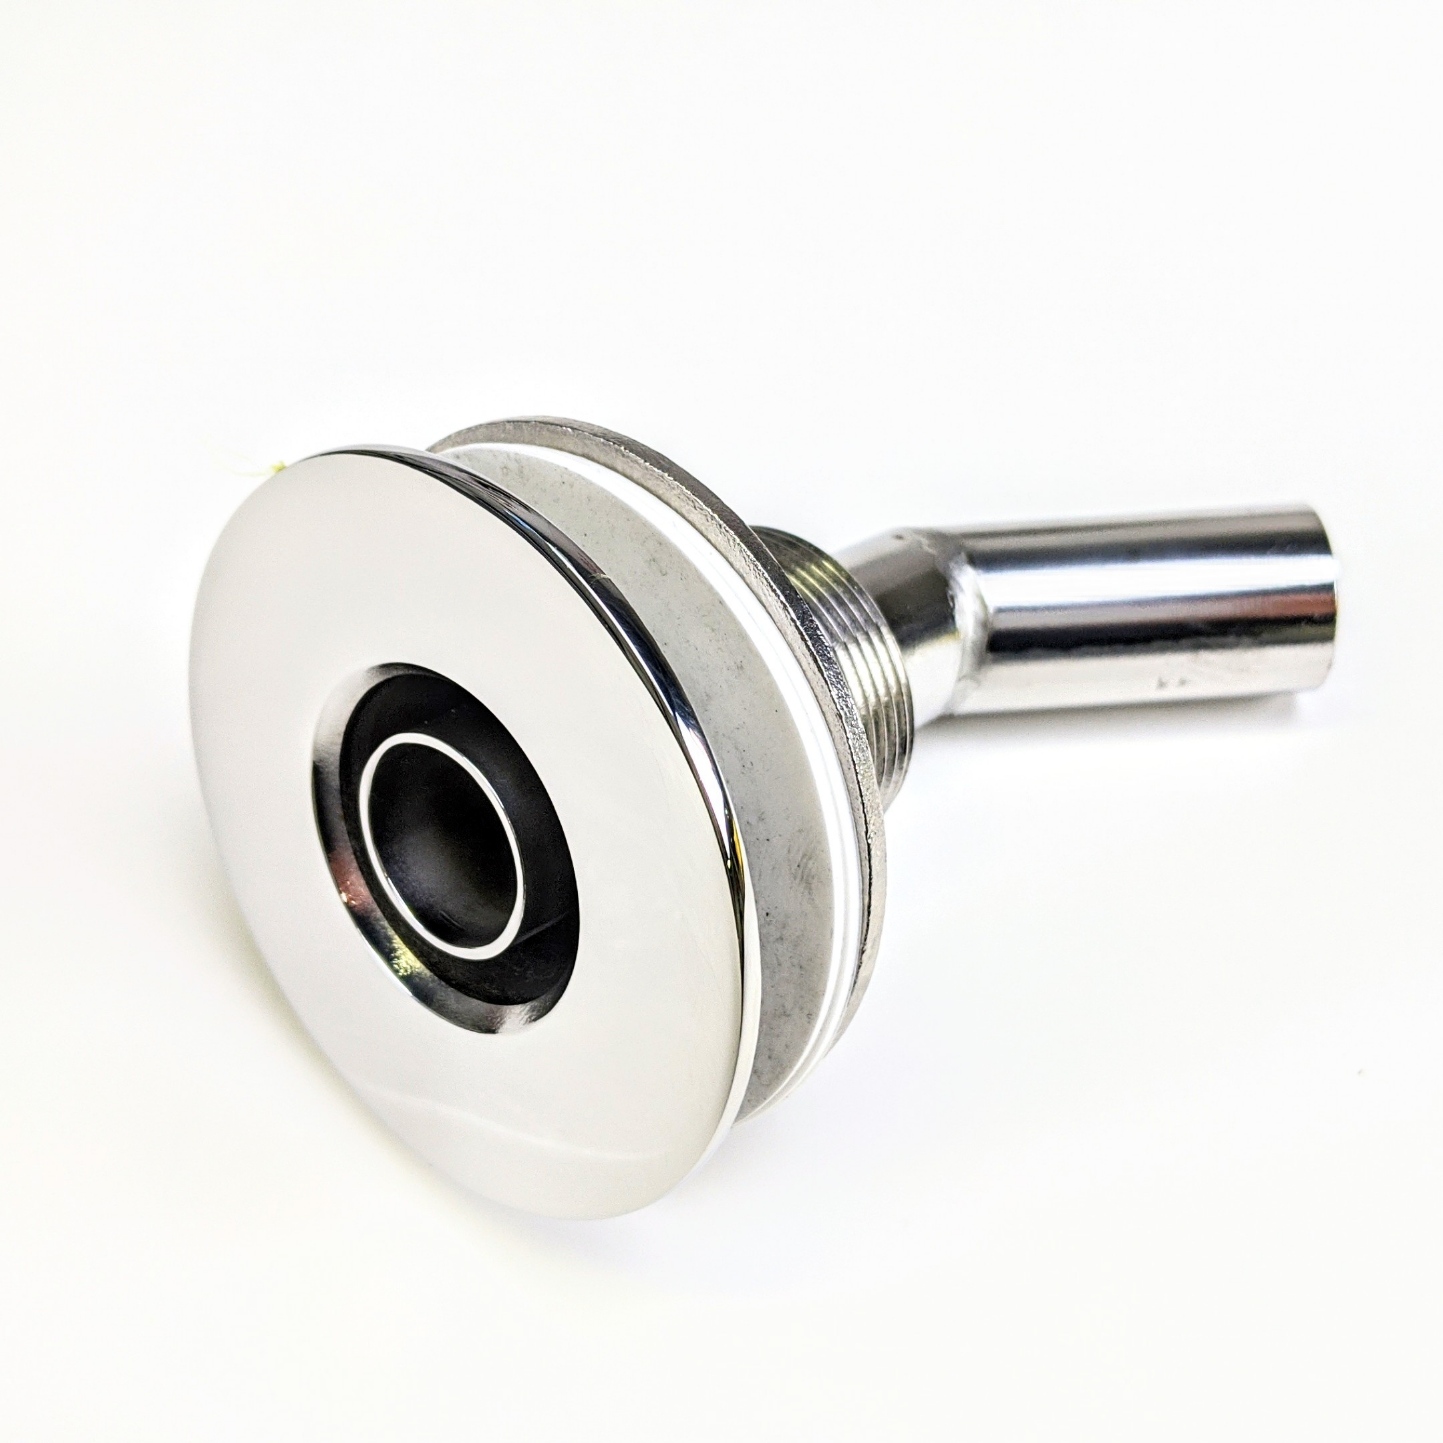 Threaded stainless thru-hull exhaust fitting 22, 24, 38mm - General